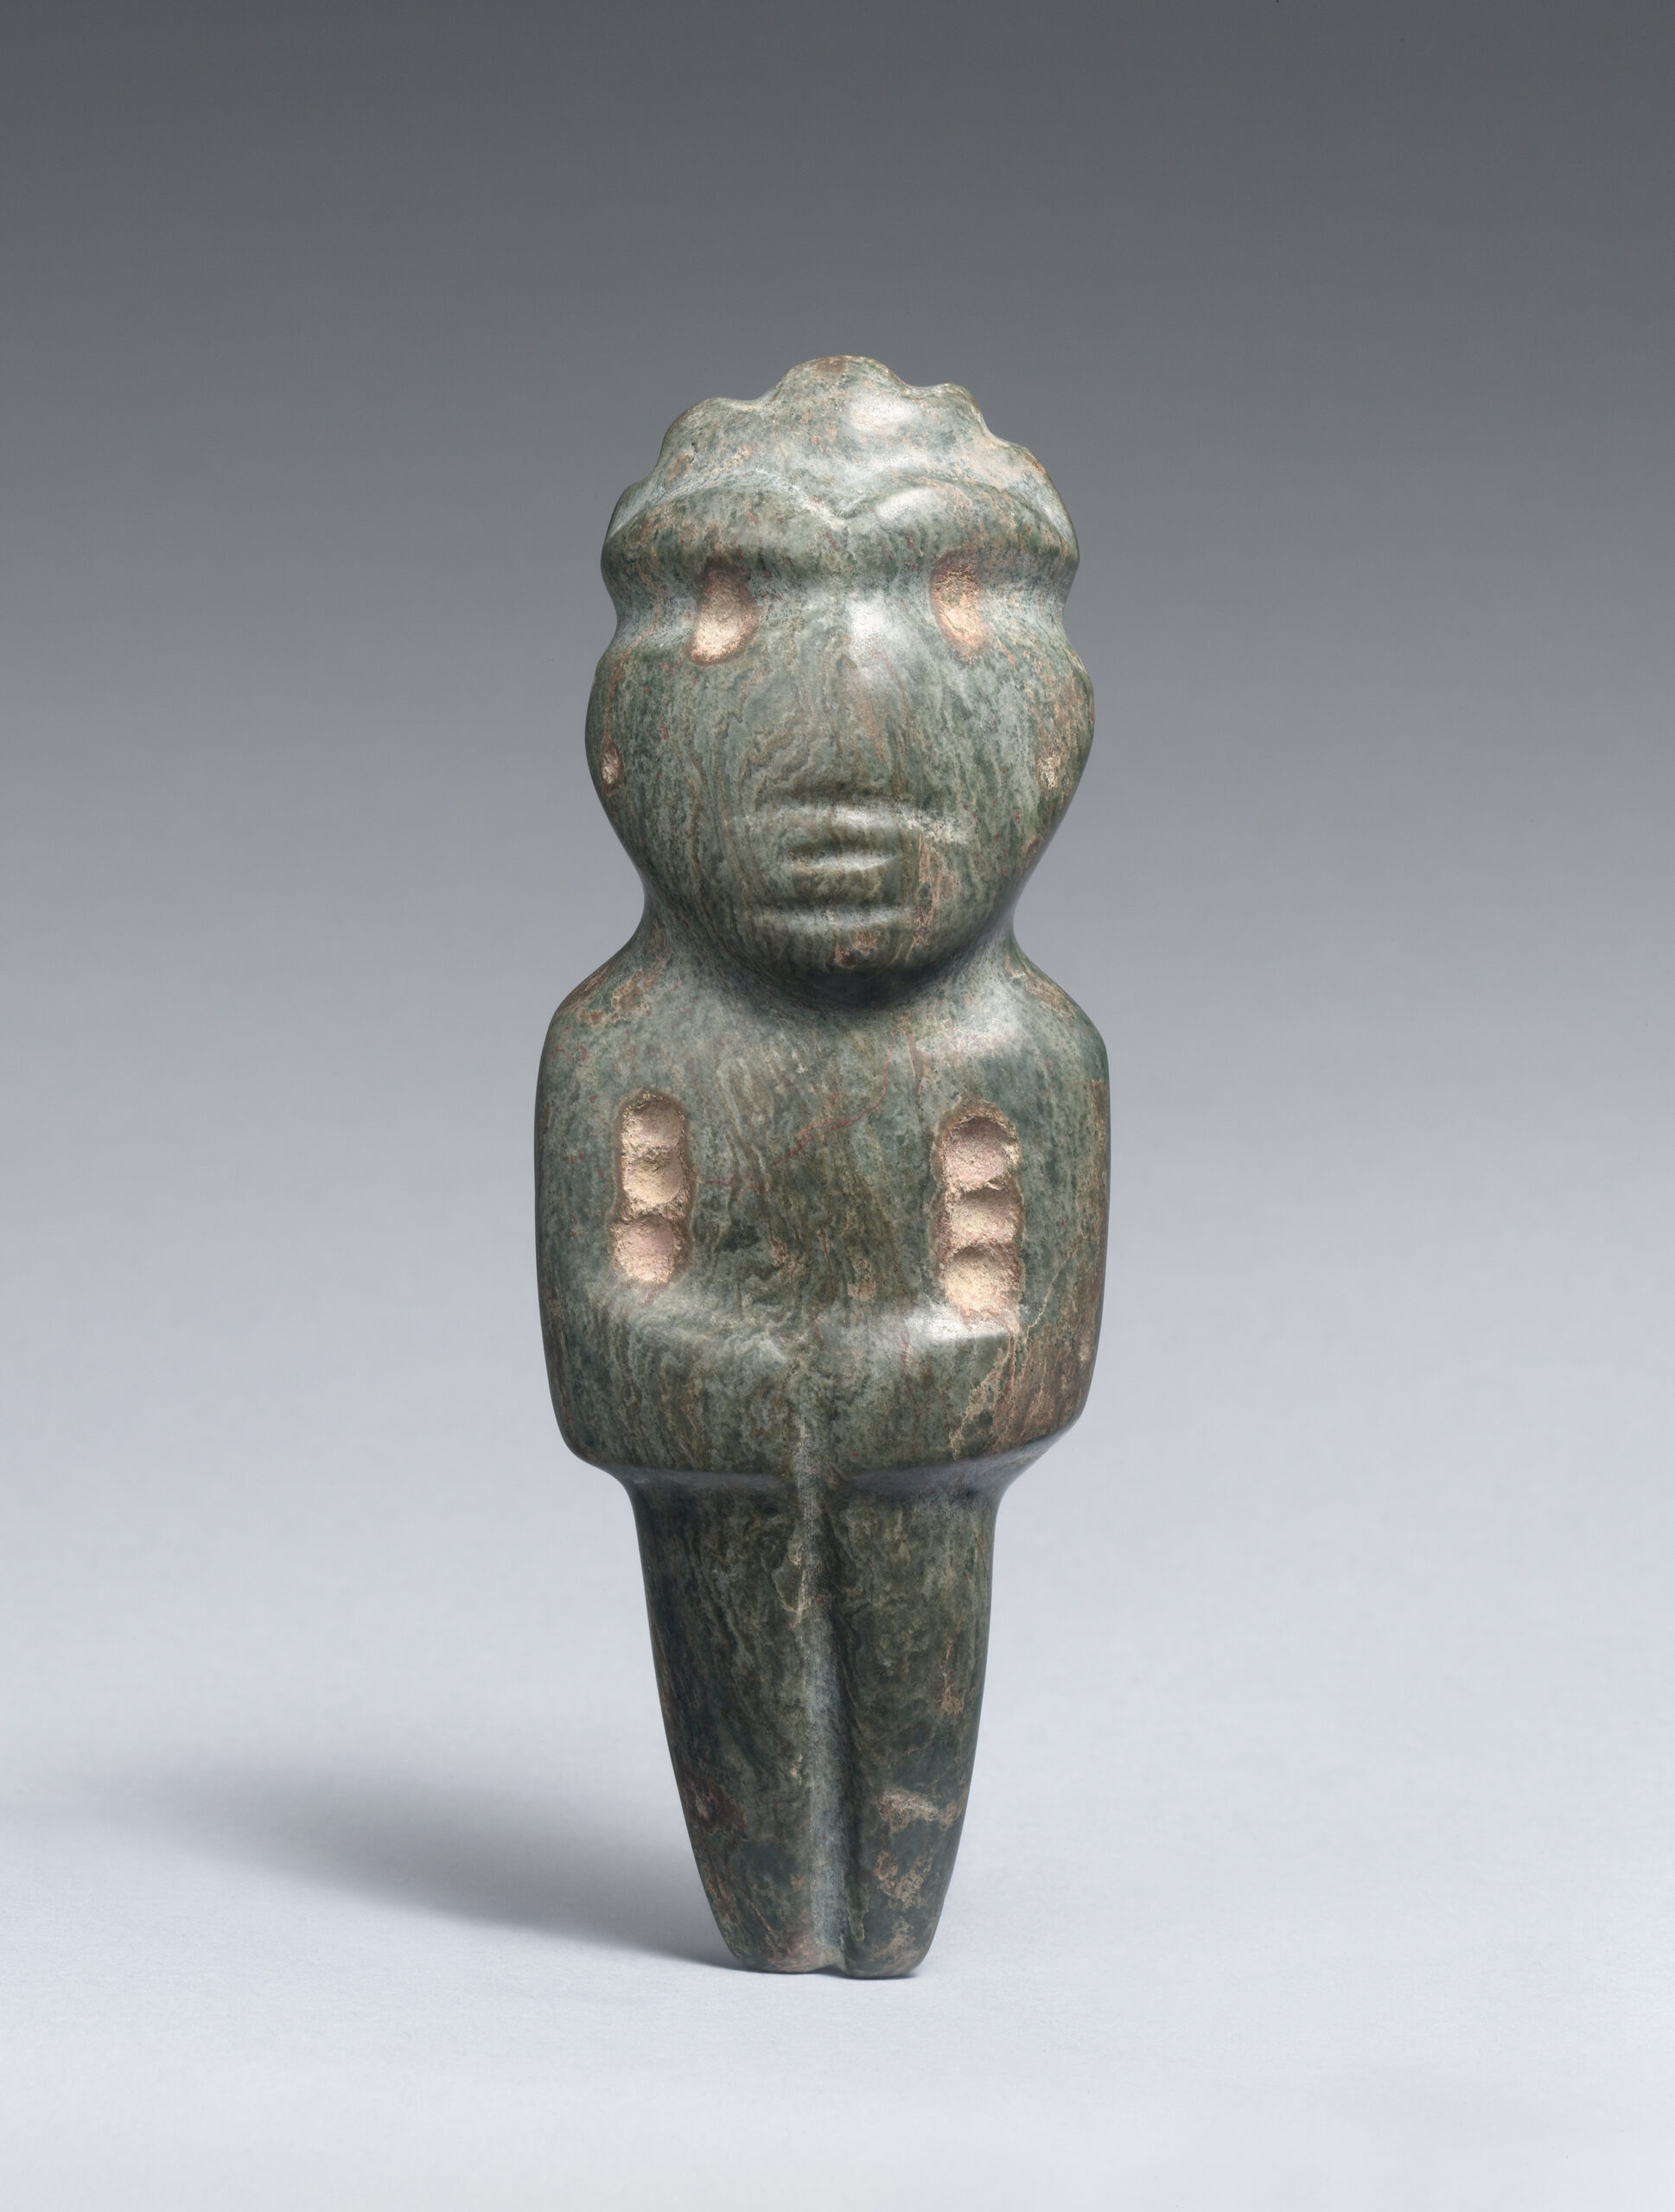 Standing stone figure with pecked round eyes, humanistic facial features, and arms folded across the abdomen.